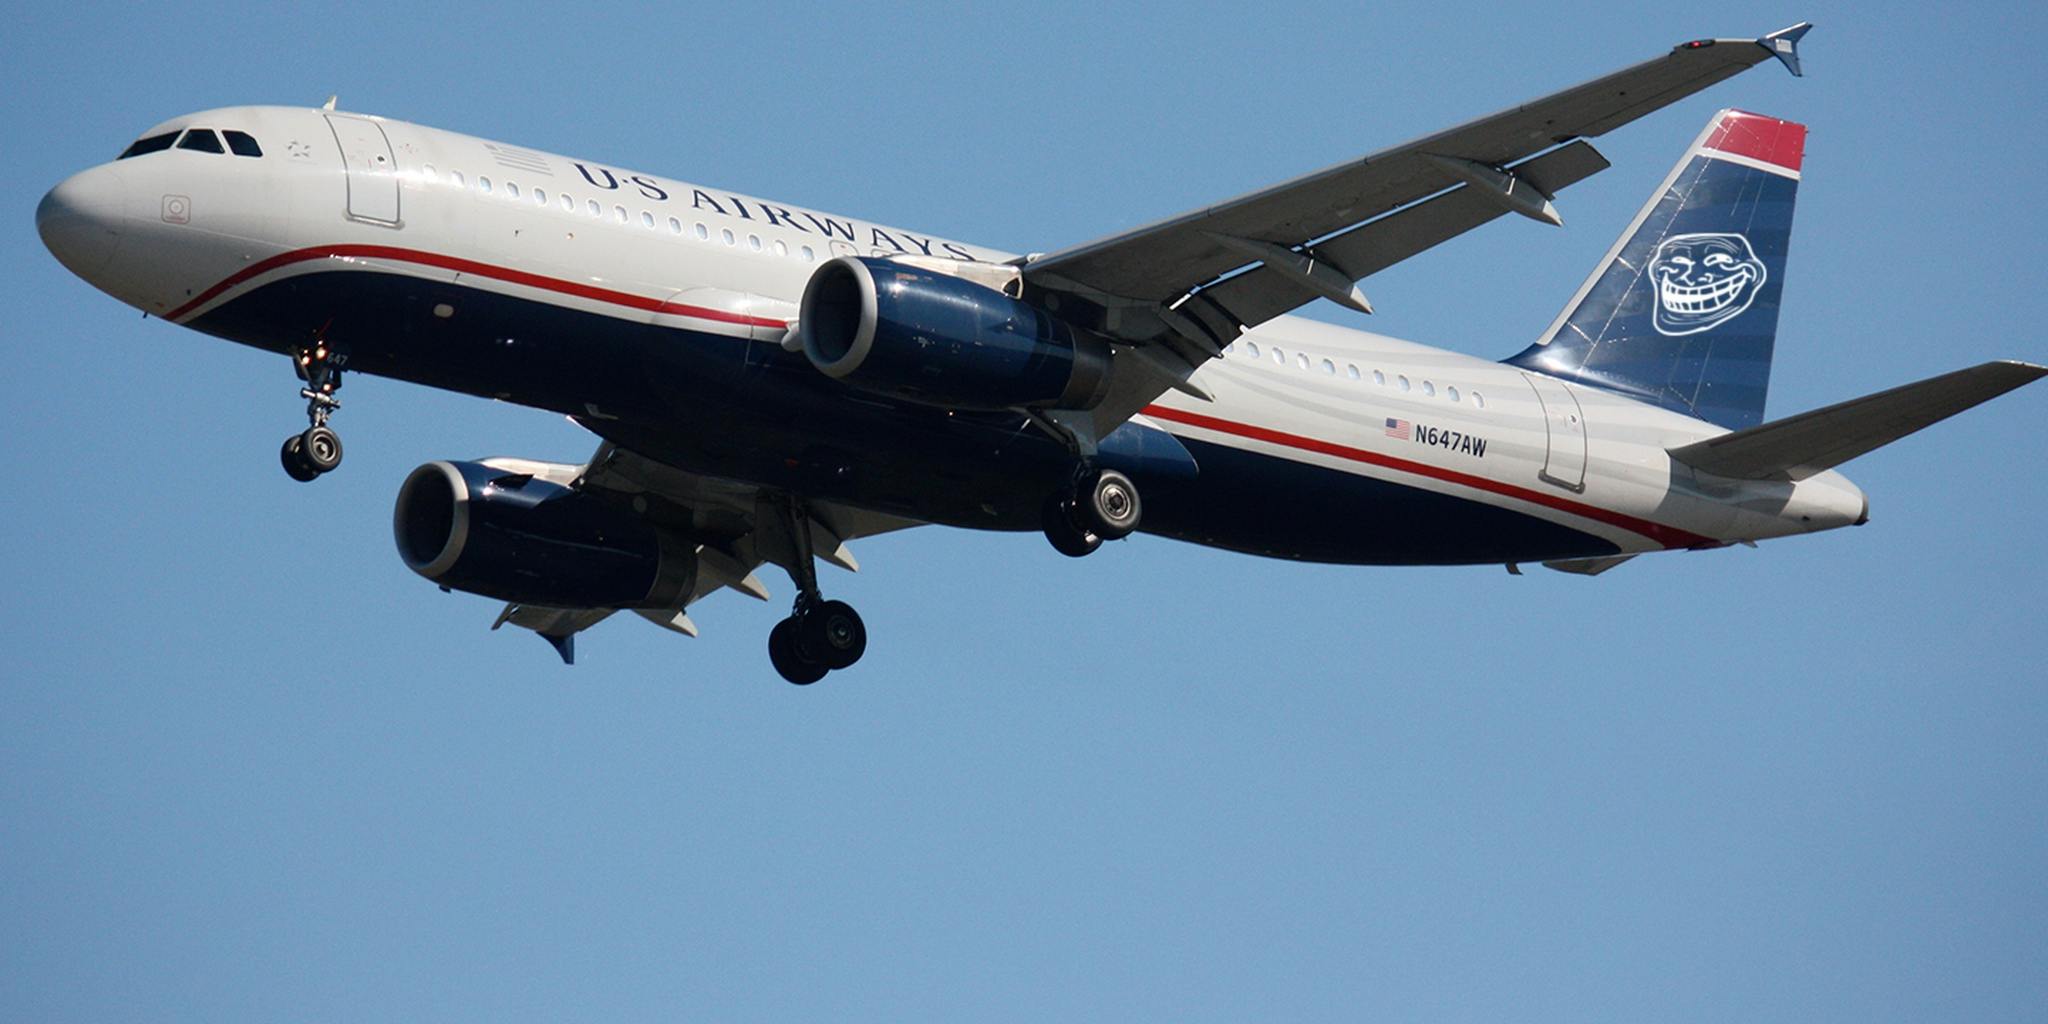 US Airways actually tweeted the most NSFW photo imaginable